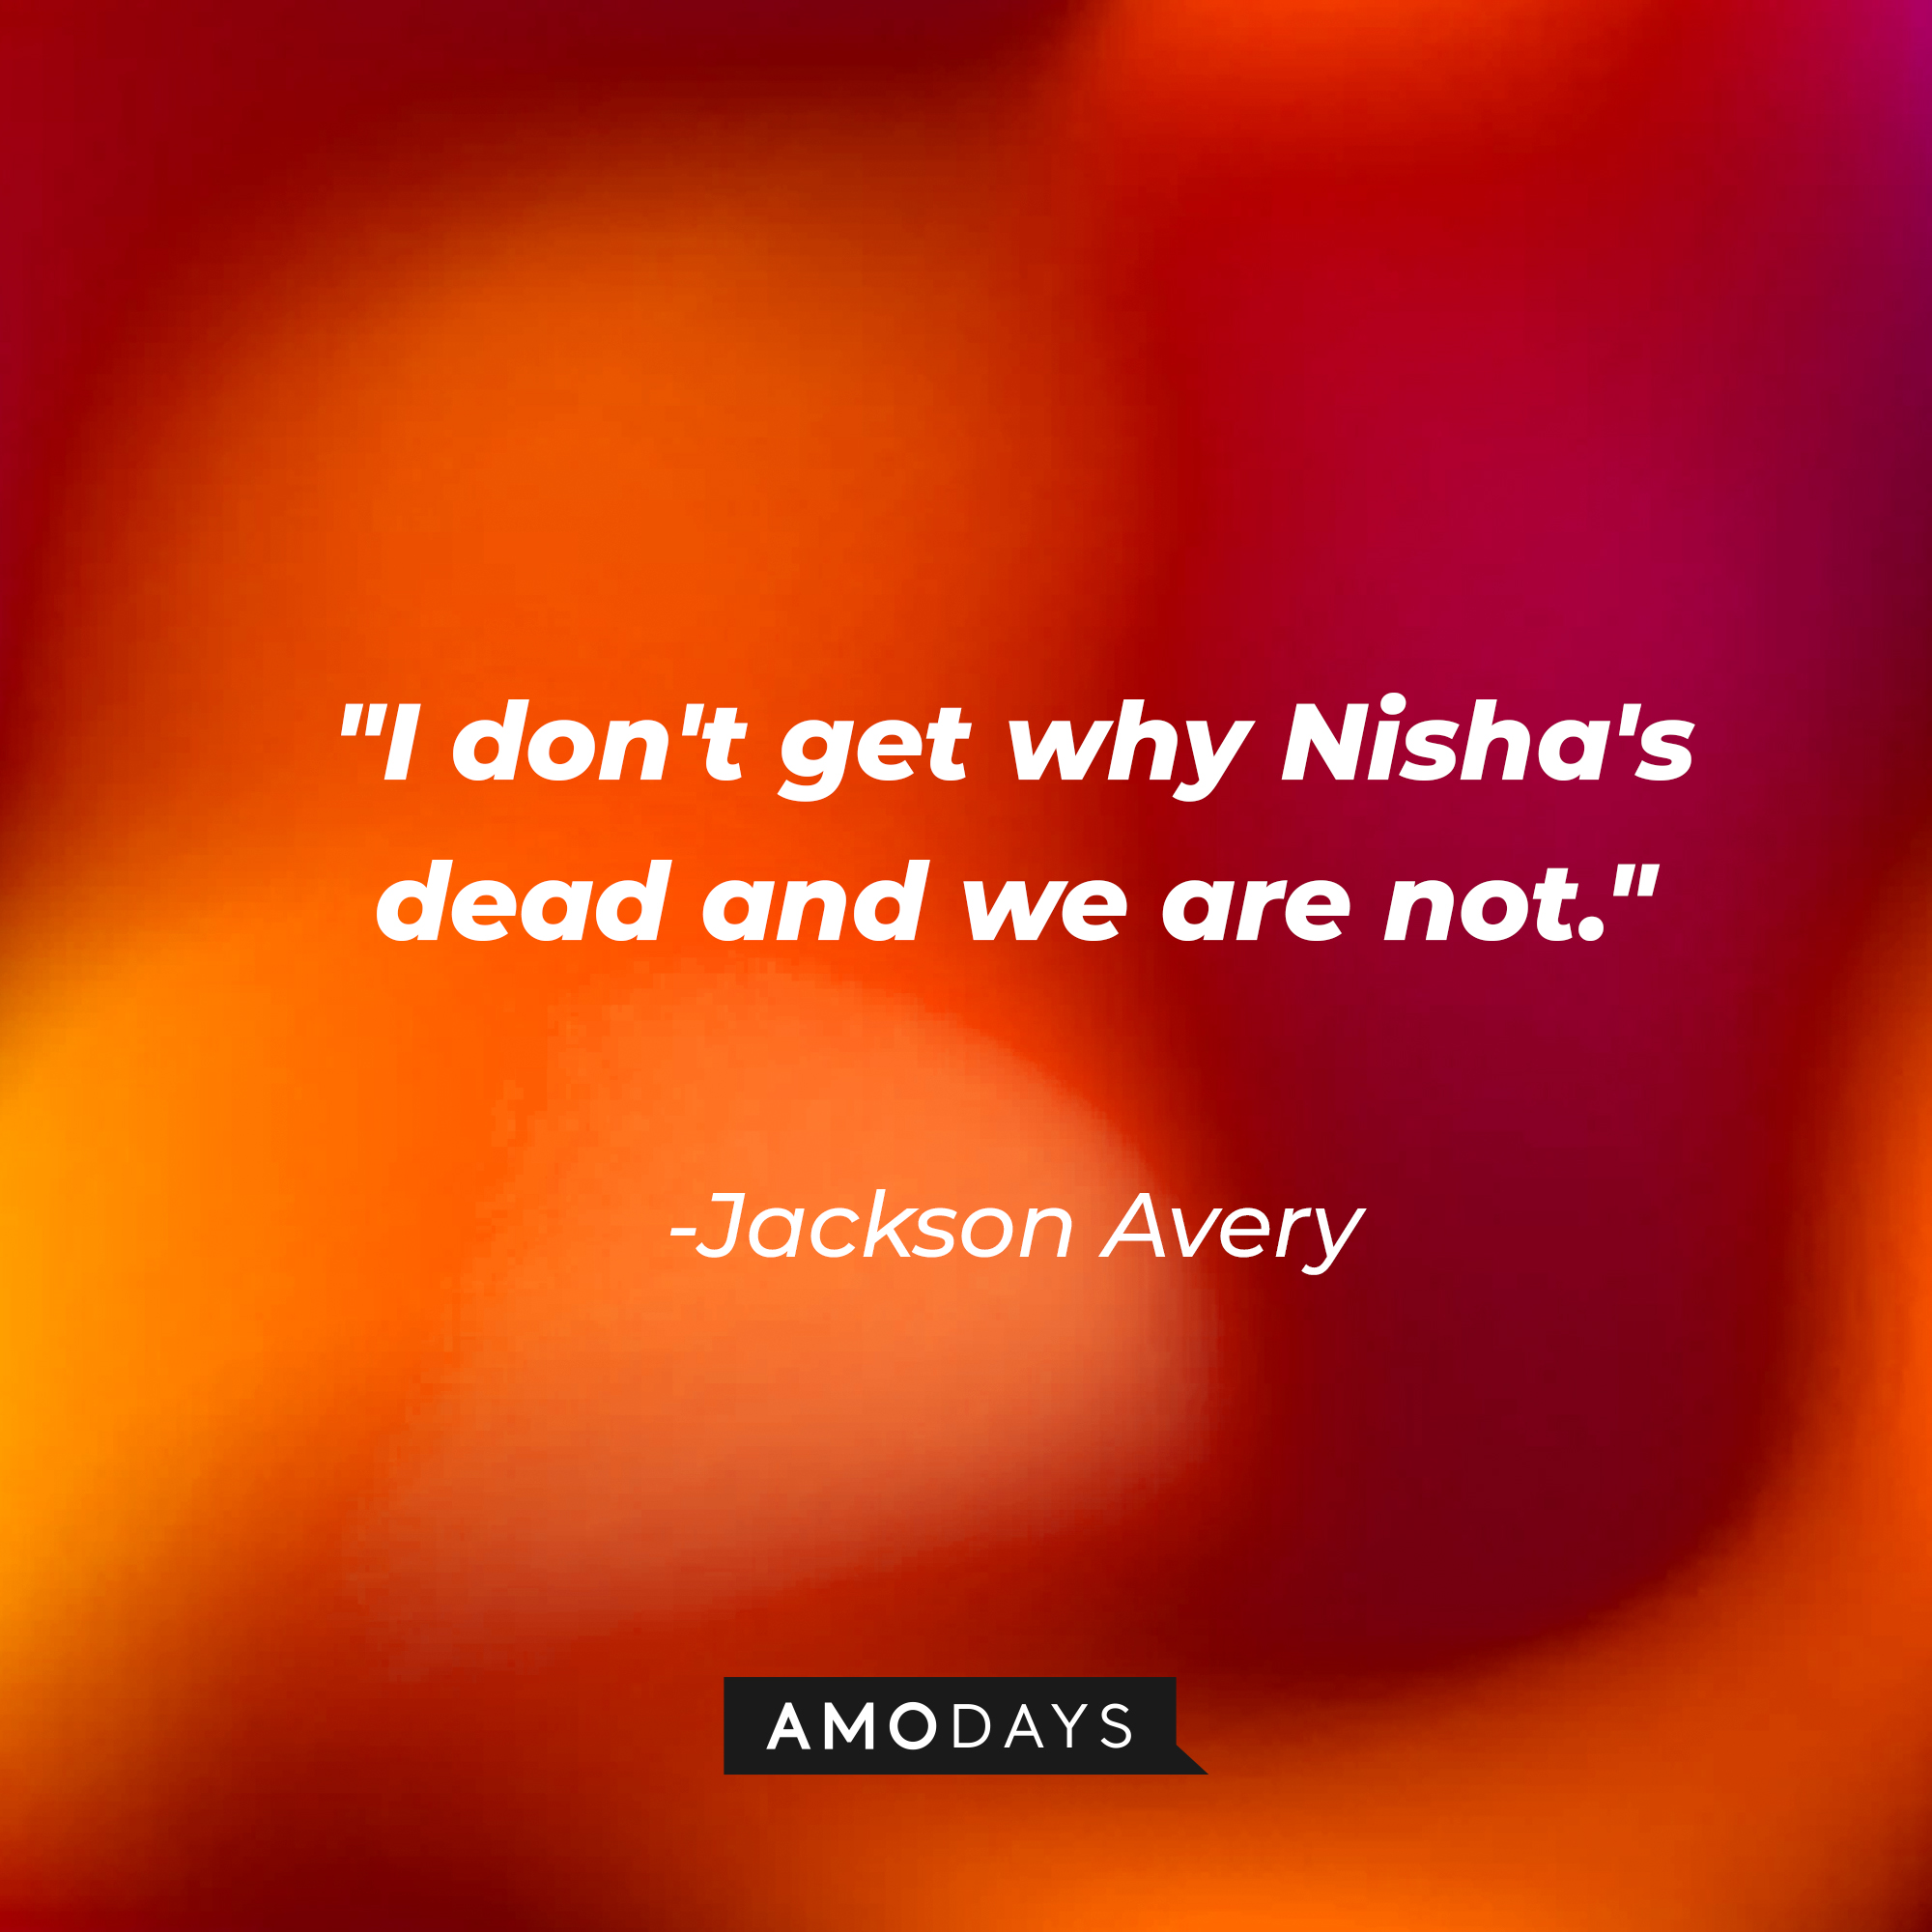 Jackson Avery’s quote: “I don't get why Nisha's dead and we are not.”  |Source: AmoDays